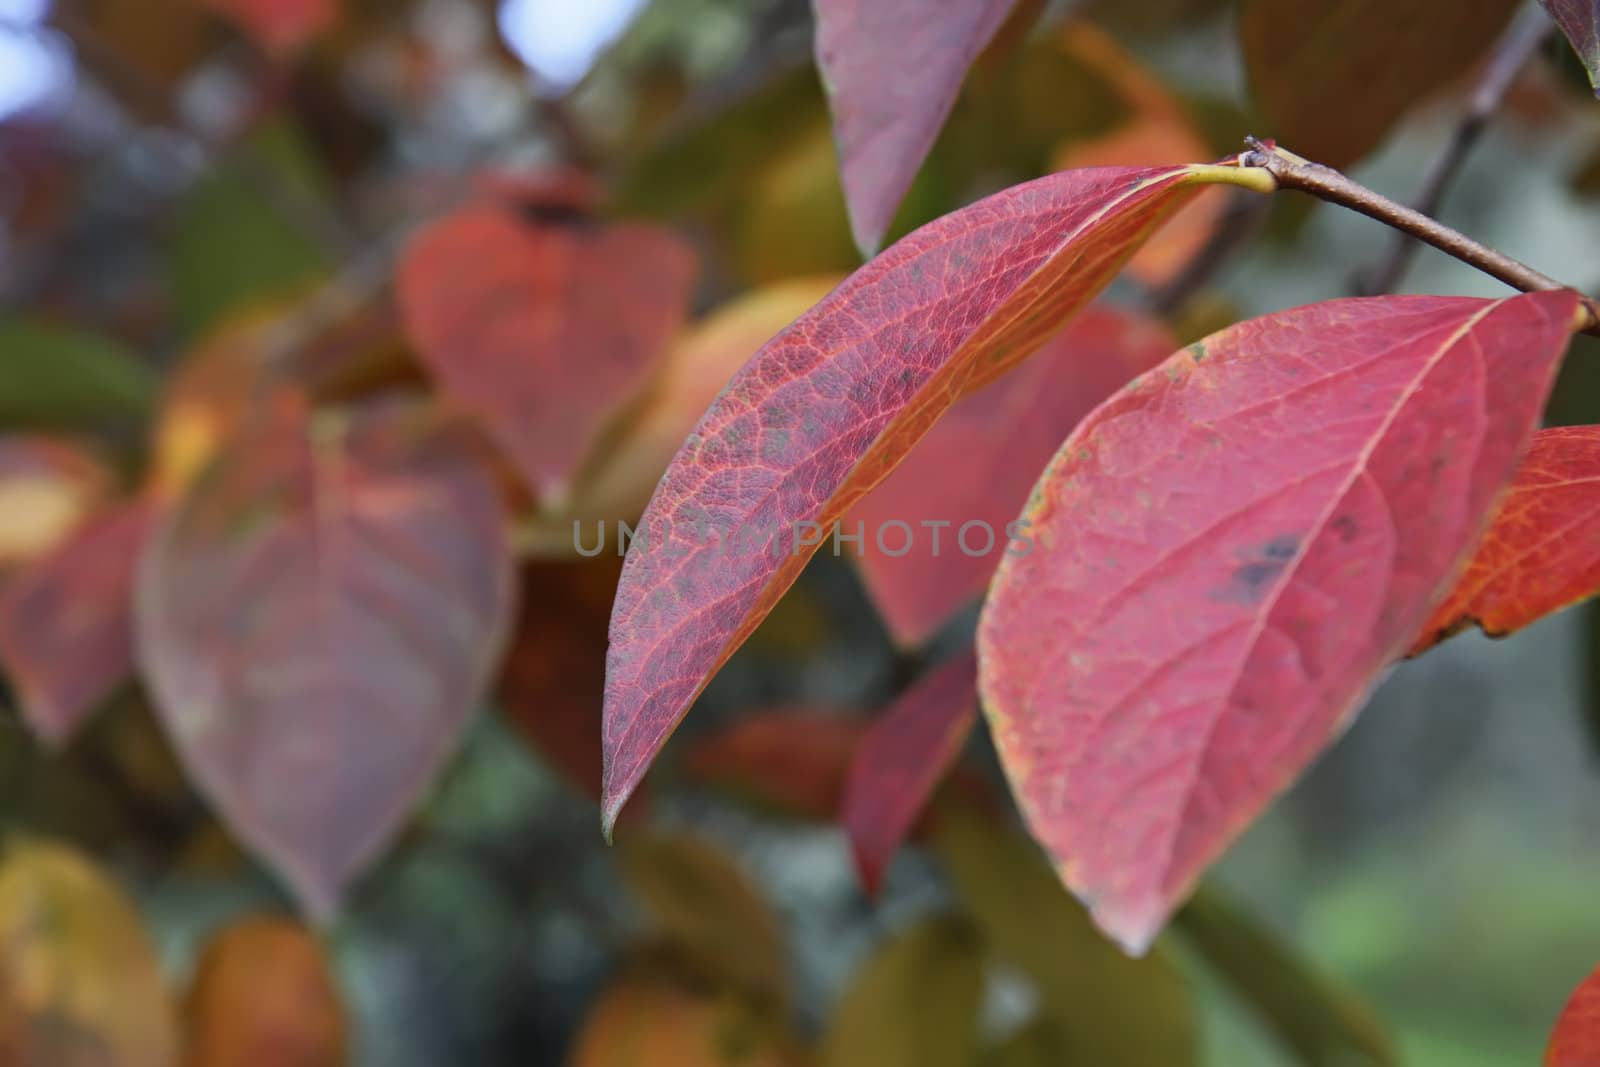 Italy, quince tree leaves in autumn by agiampiccolo